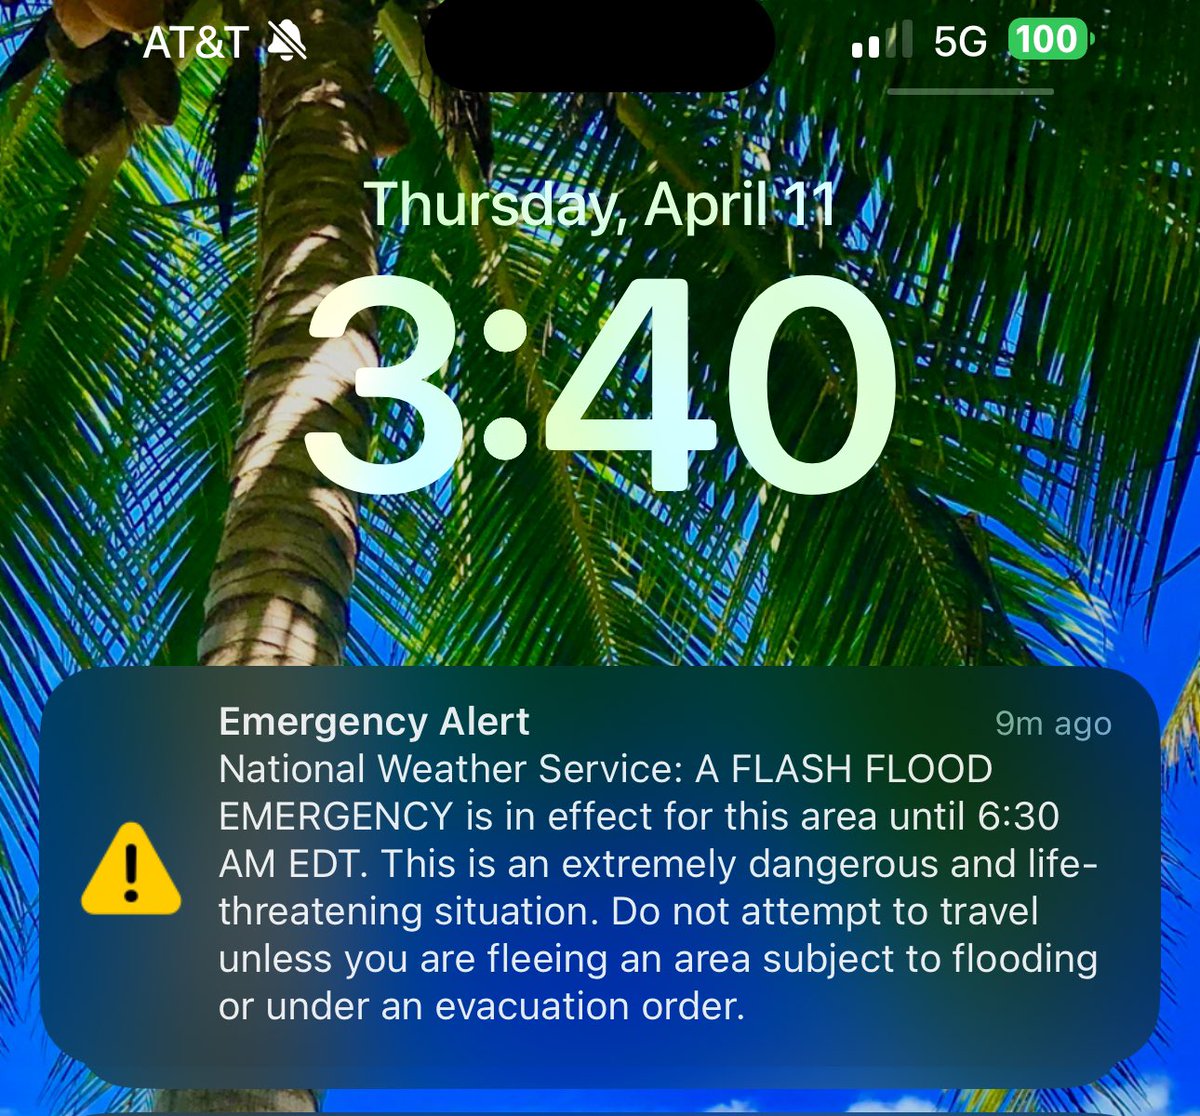 ⛈️⚡️🌪️ Mother Nature's 3:31 am wake-up call in Tallahassee: rocking and rolling through a serious thunderstorms. 

📲 ✅ Keep your emergency alerts enabled! 
@Ginger_Zee @EKCopelandwx #FLWx #Wx